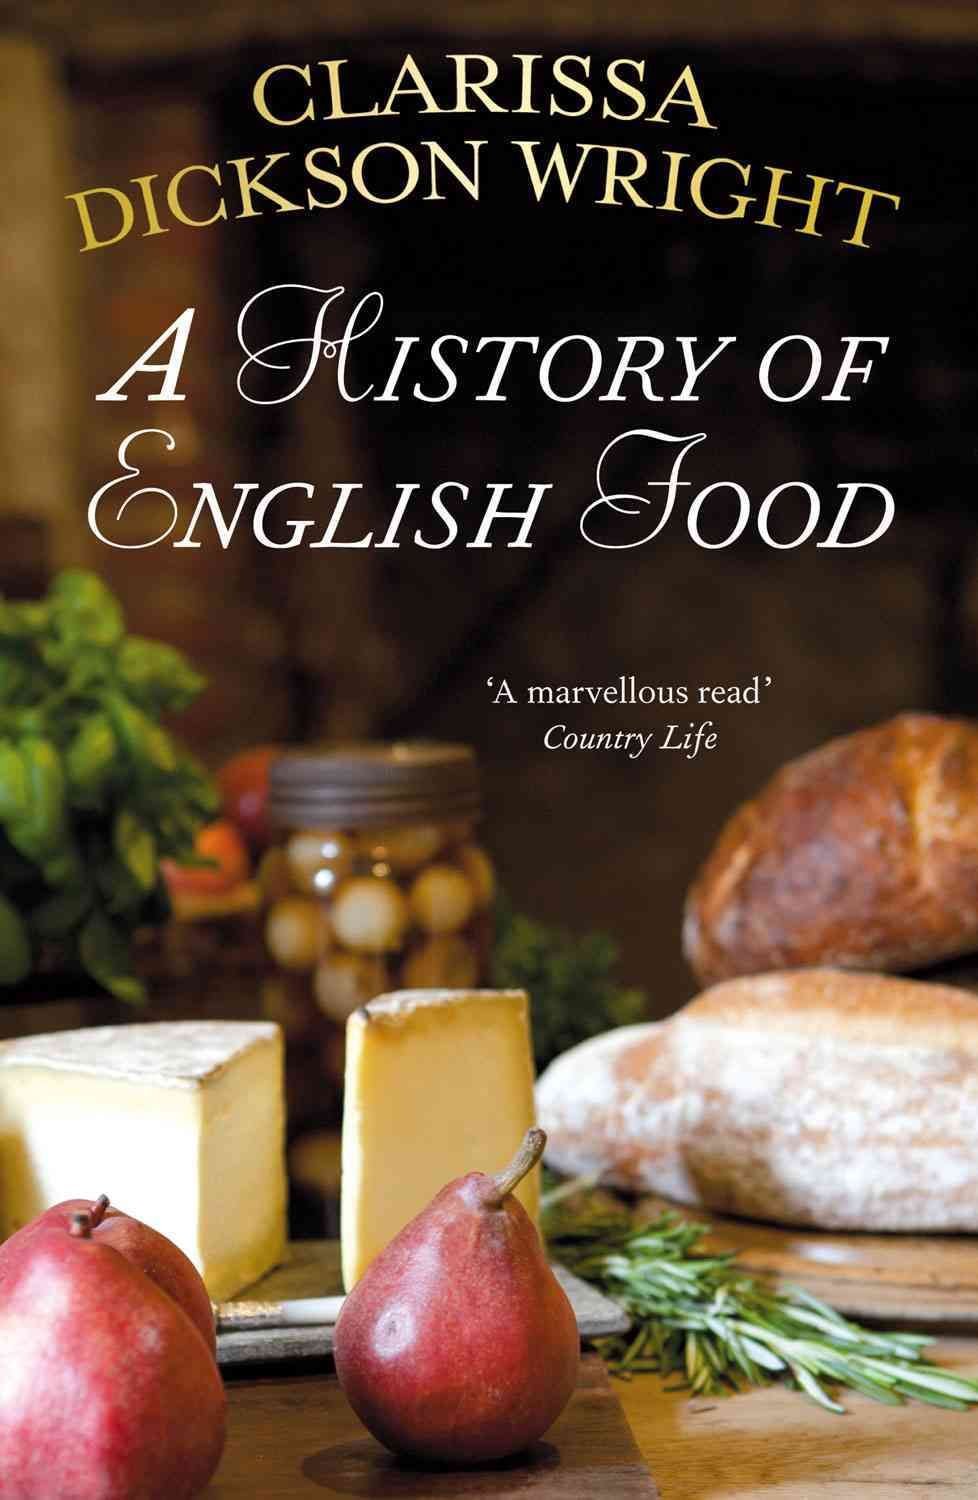 Free　Wright　Food　by　of　Delivery　Dickson　With　English　History　Buy　Clarissa